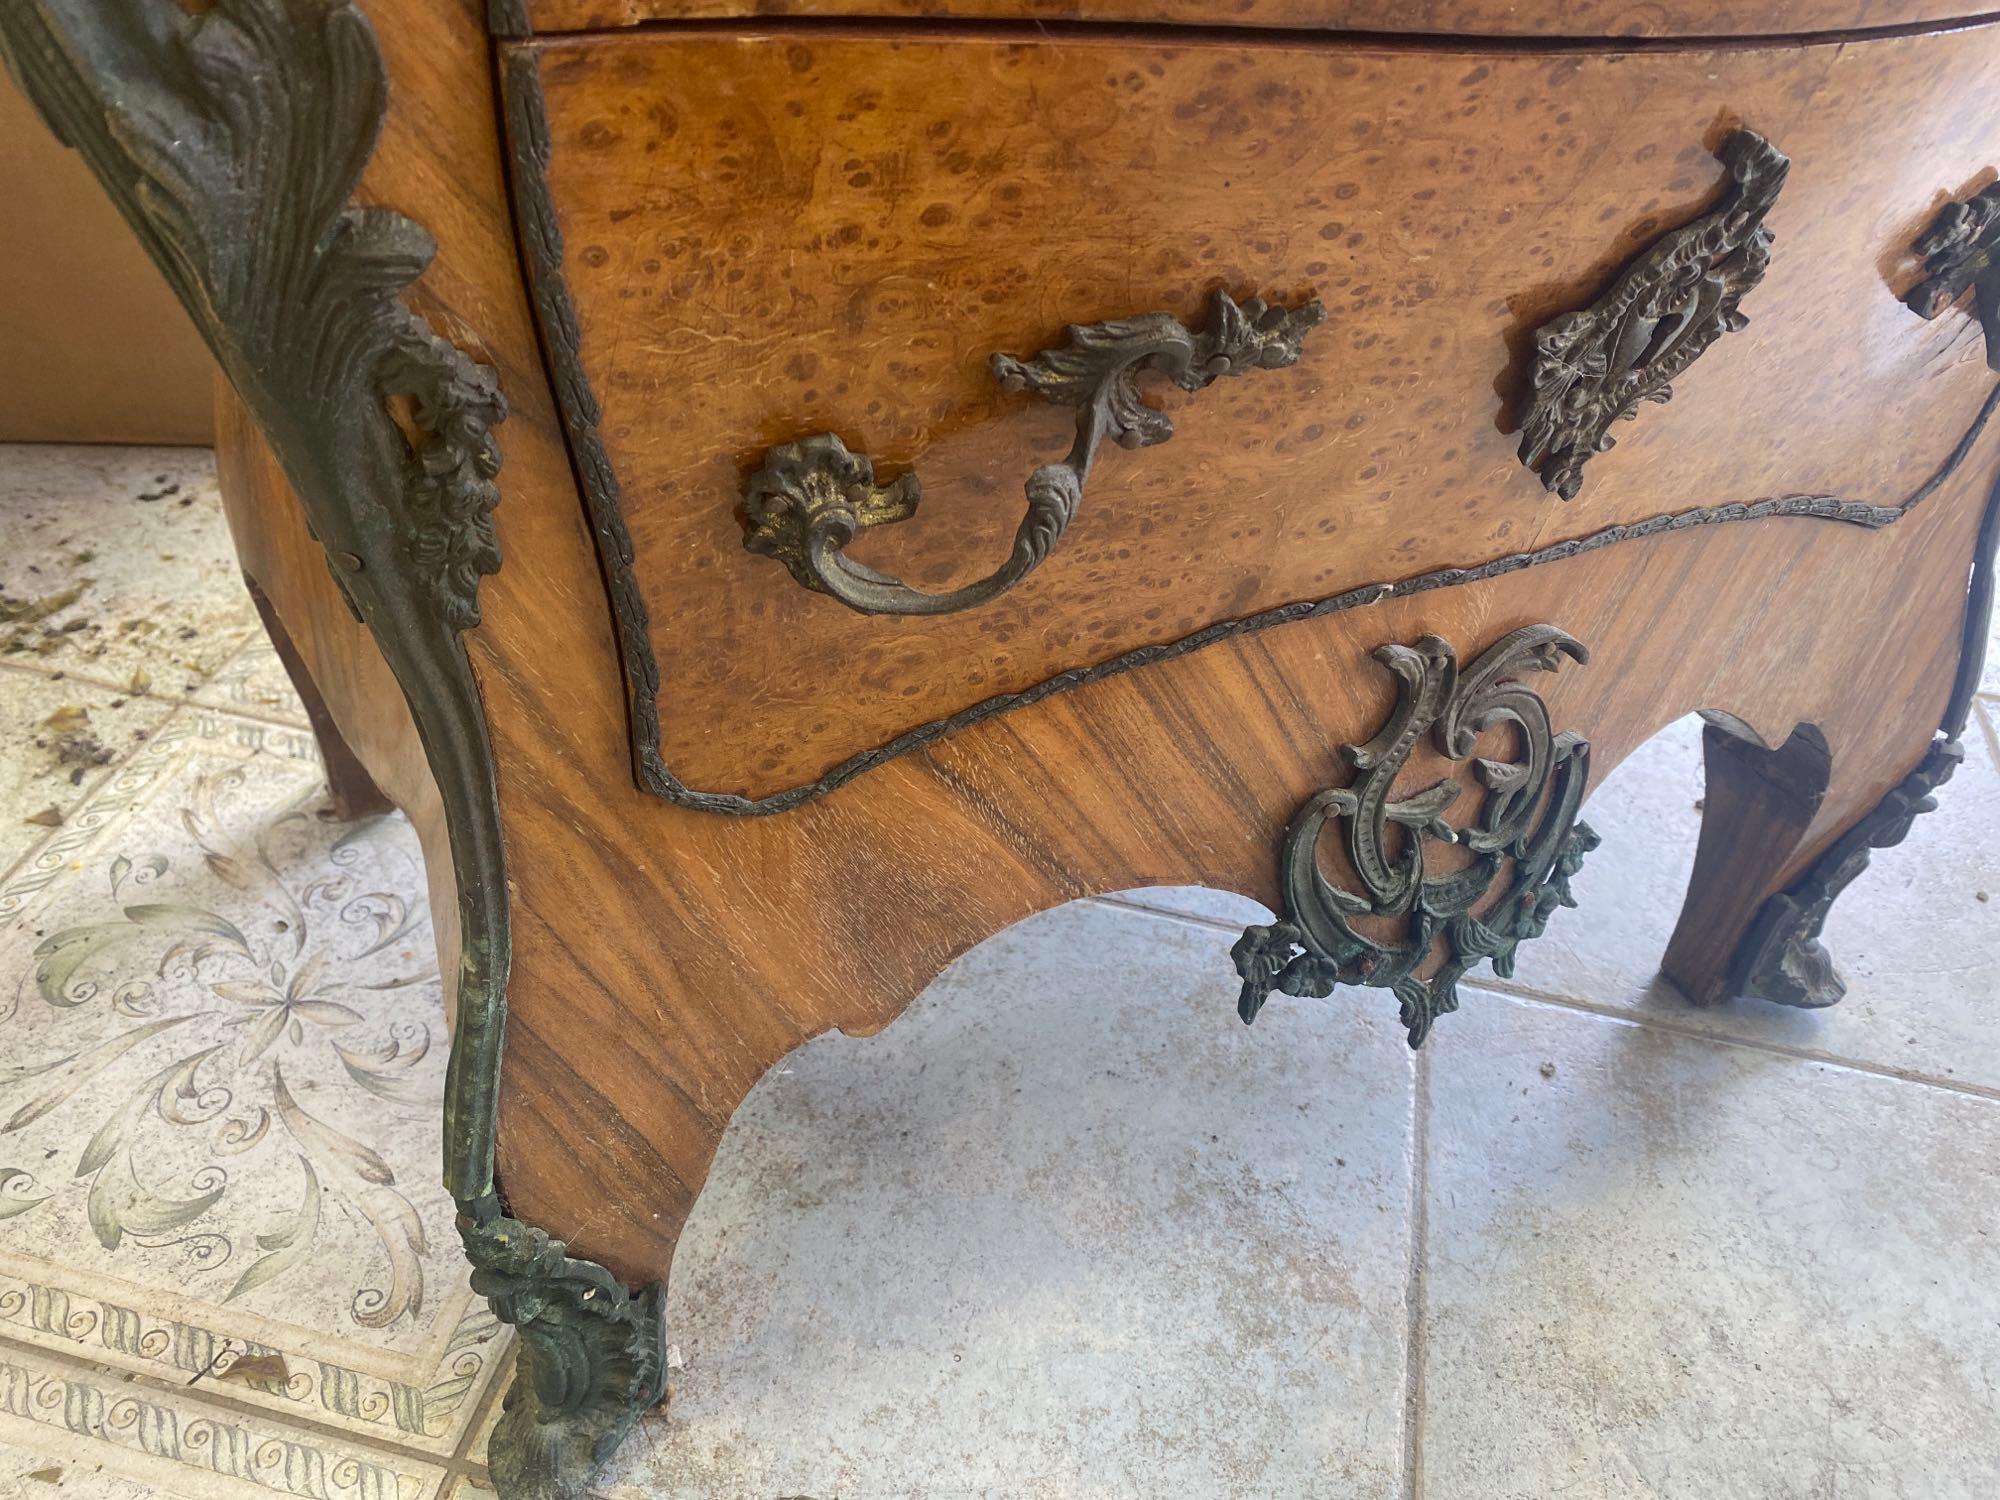 Early Ornate Burl Wood Bombay Chest of Drawers with Figural Accents, French Louis XV Style